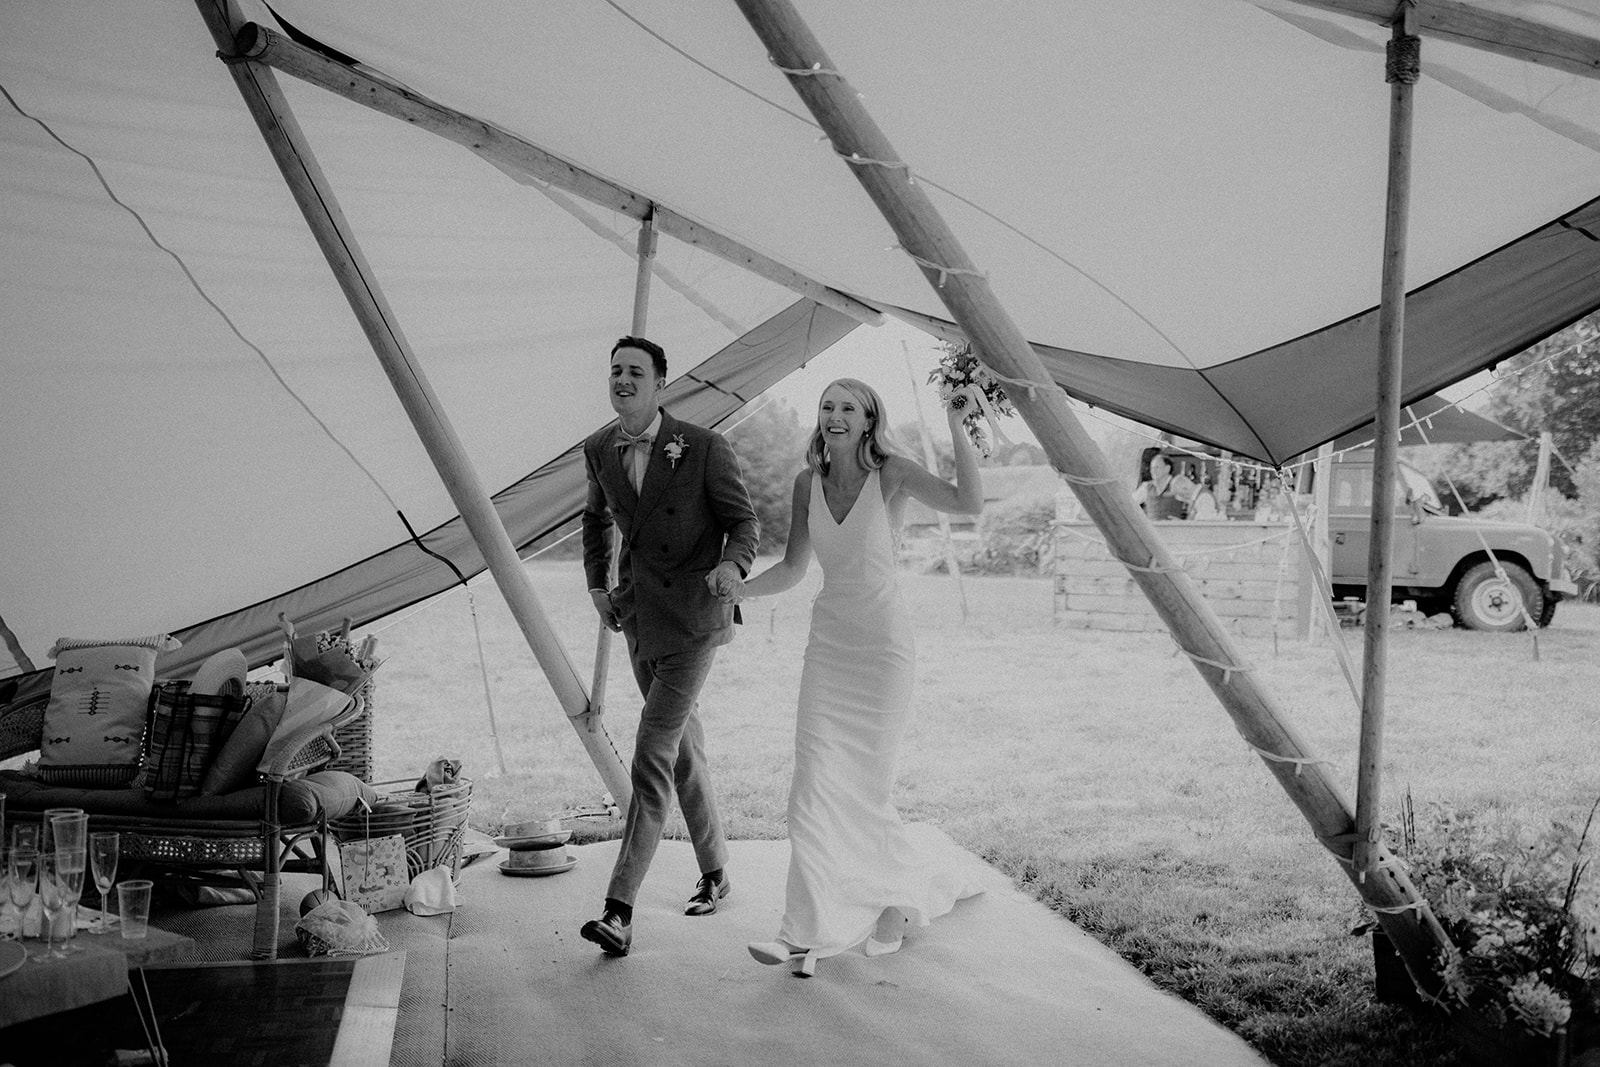 festival style wedding in sussex